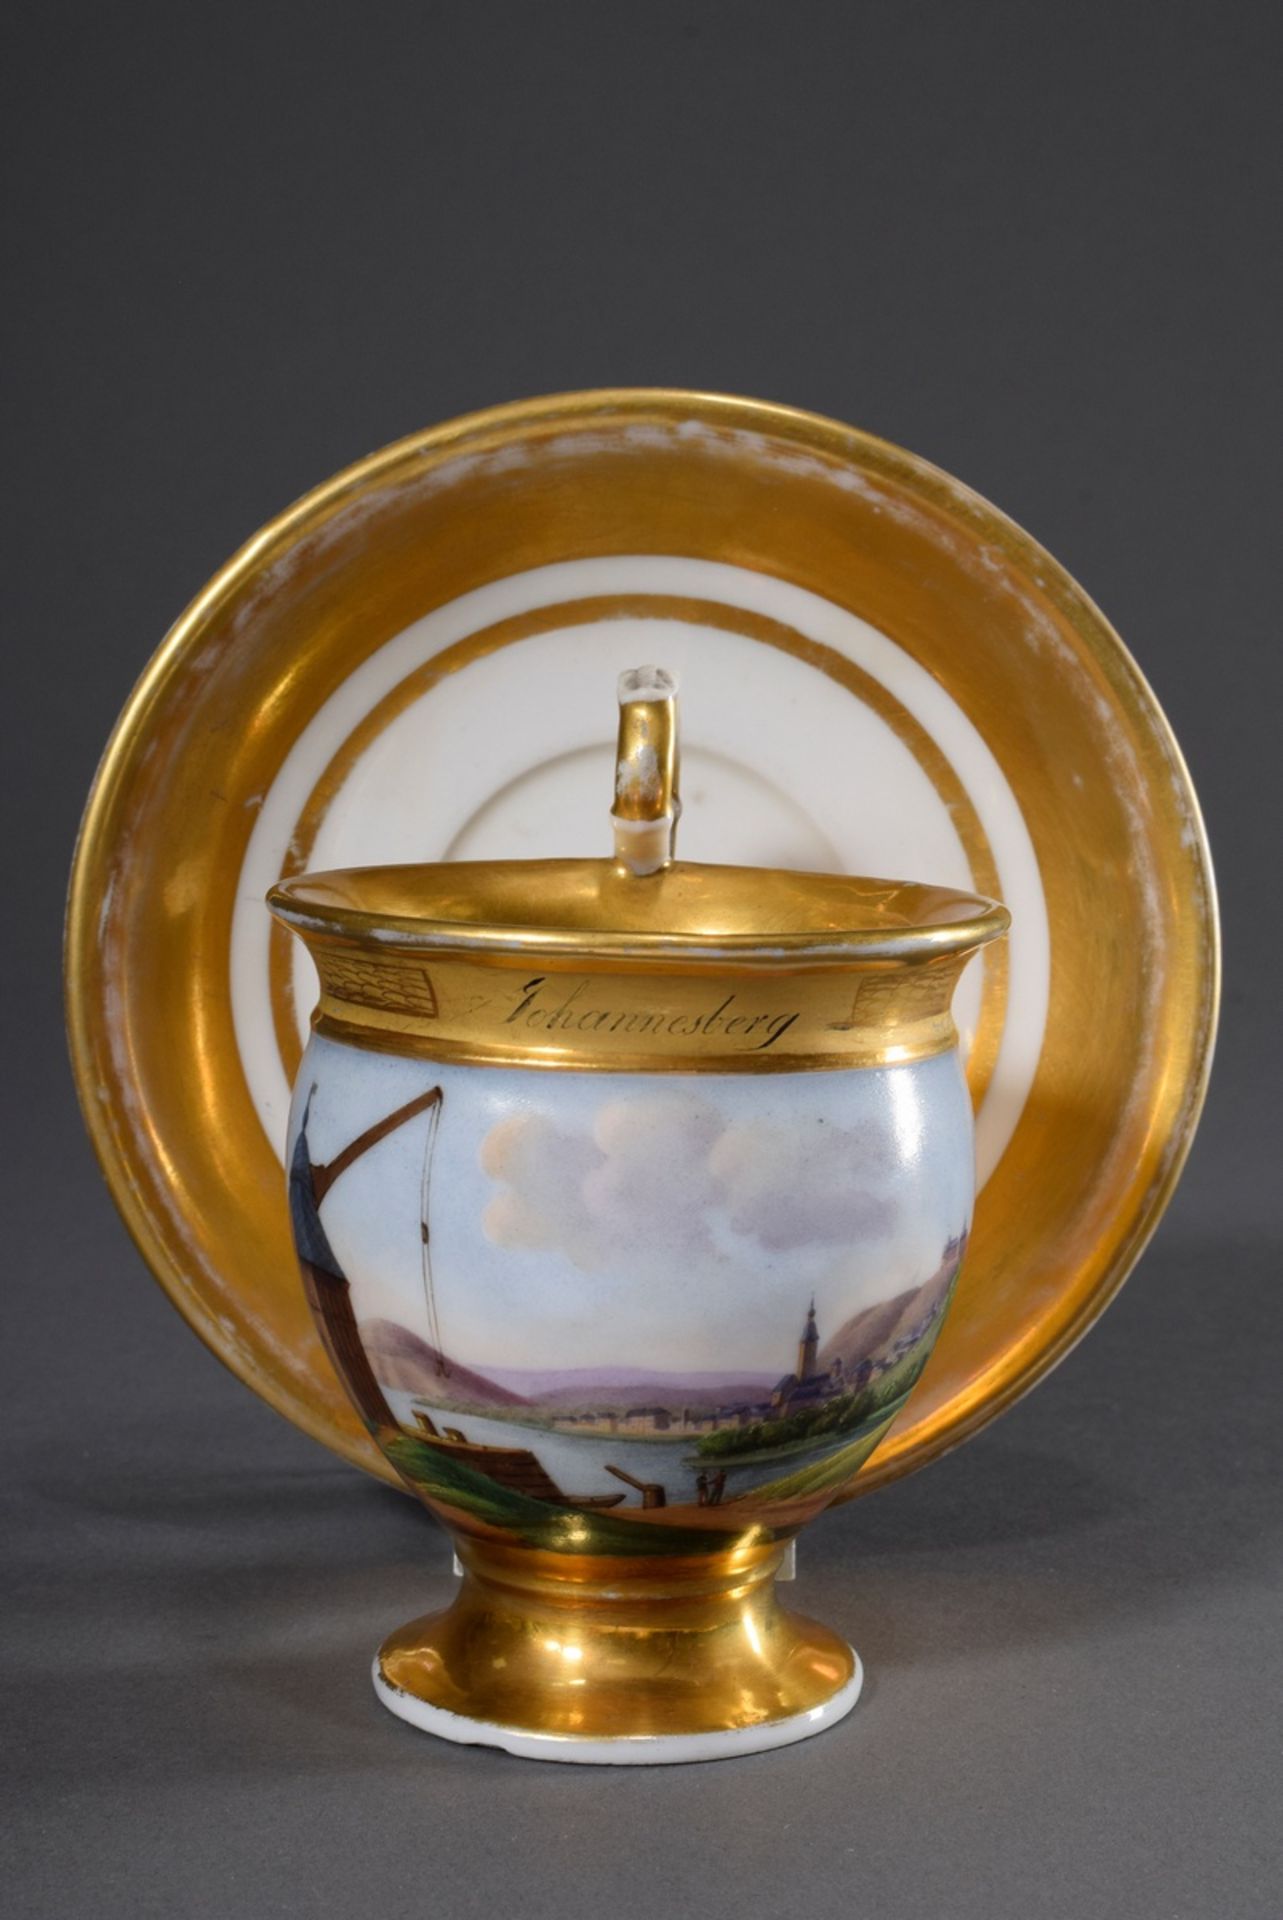 Wallendorf view cup with fine painting "Johannesberg near Fulda" on gold background, incised mark o - Image 2 of 9